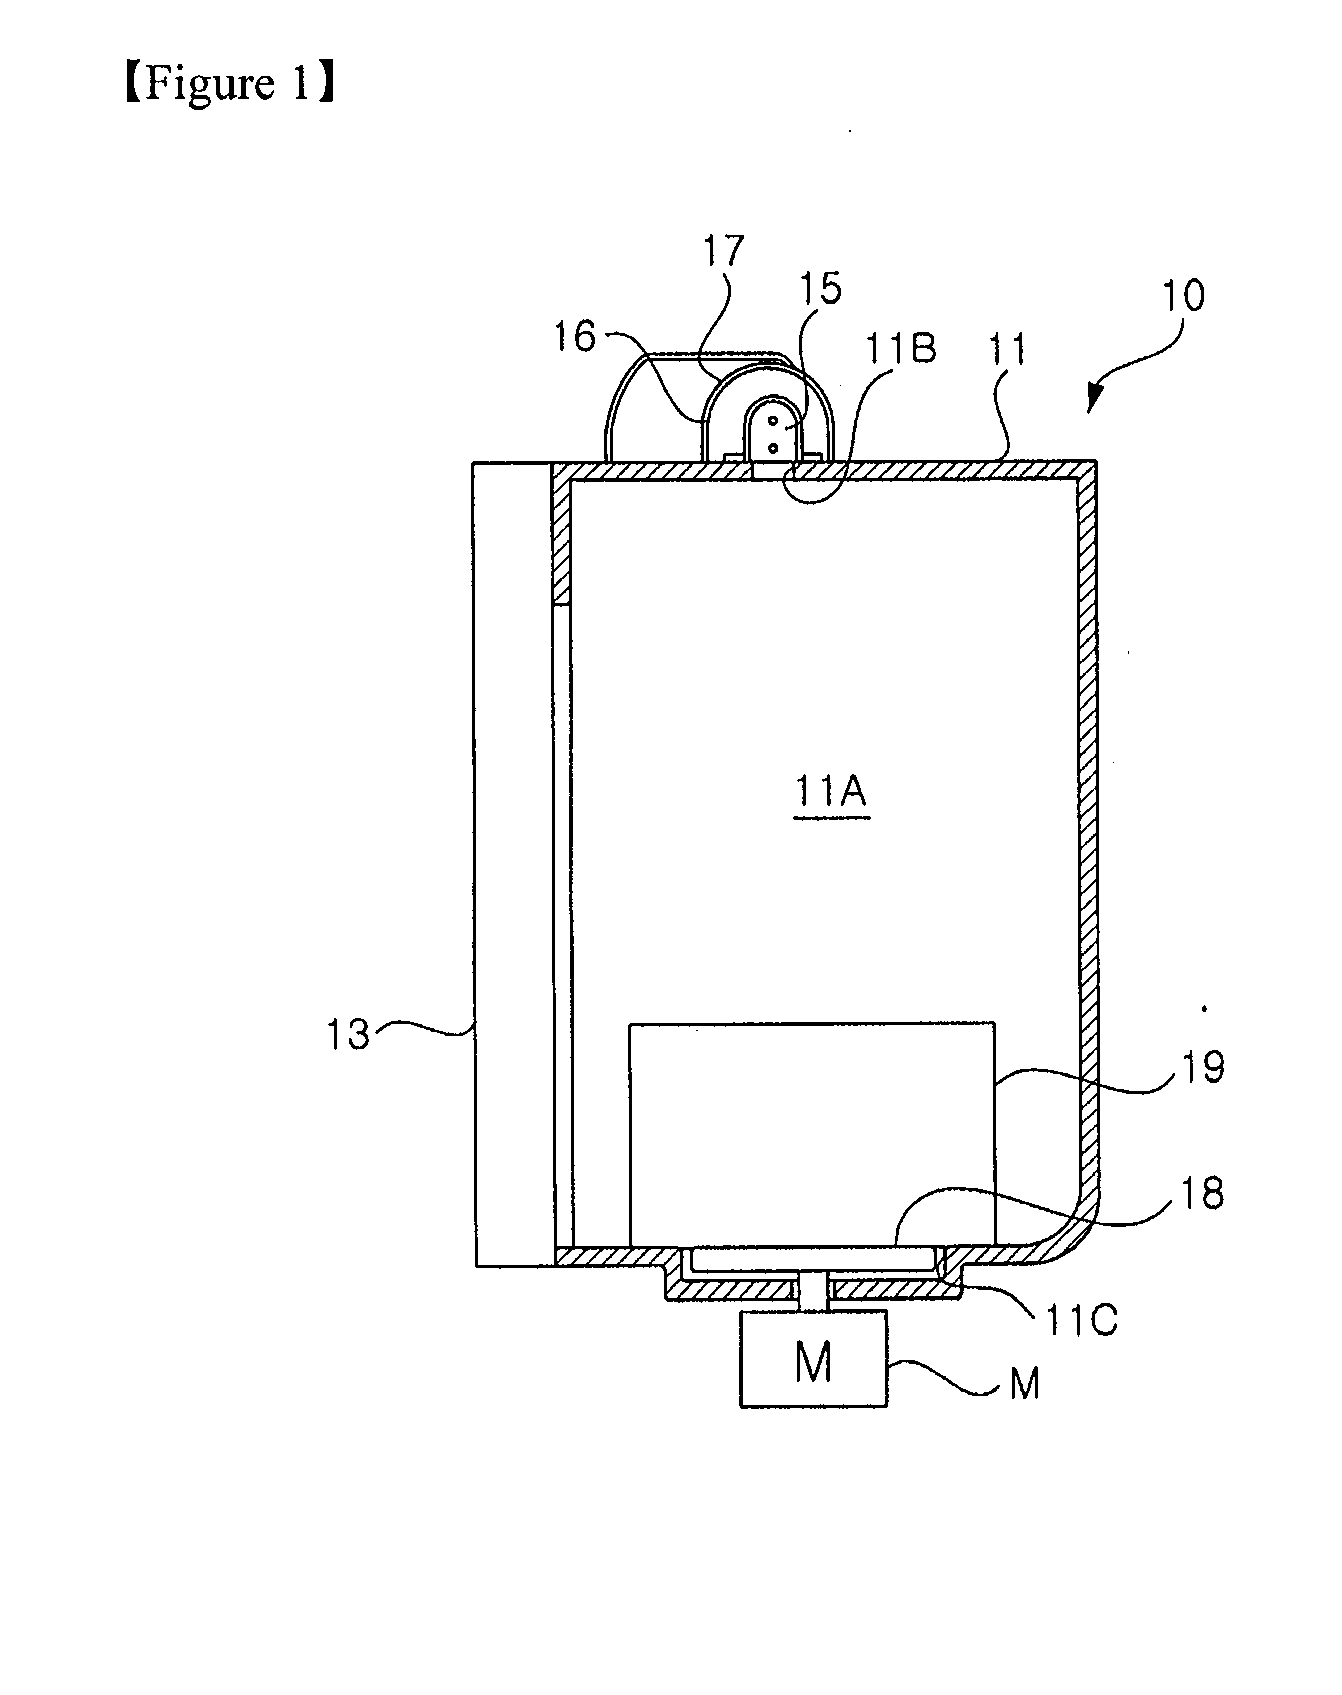 Sterilizing Device With Ultraviolet Ray And Microwave Oven Having The Same